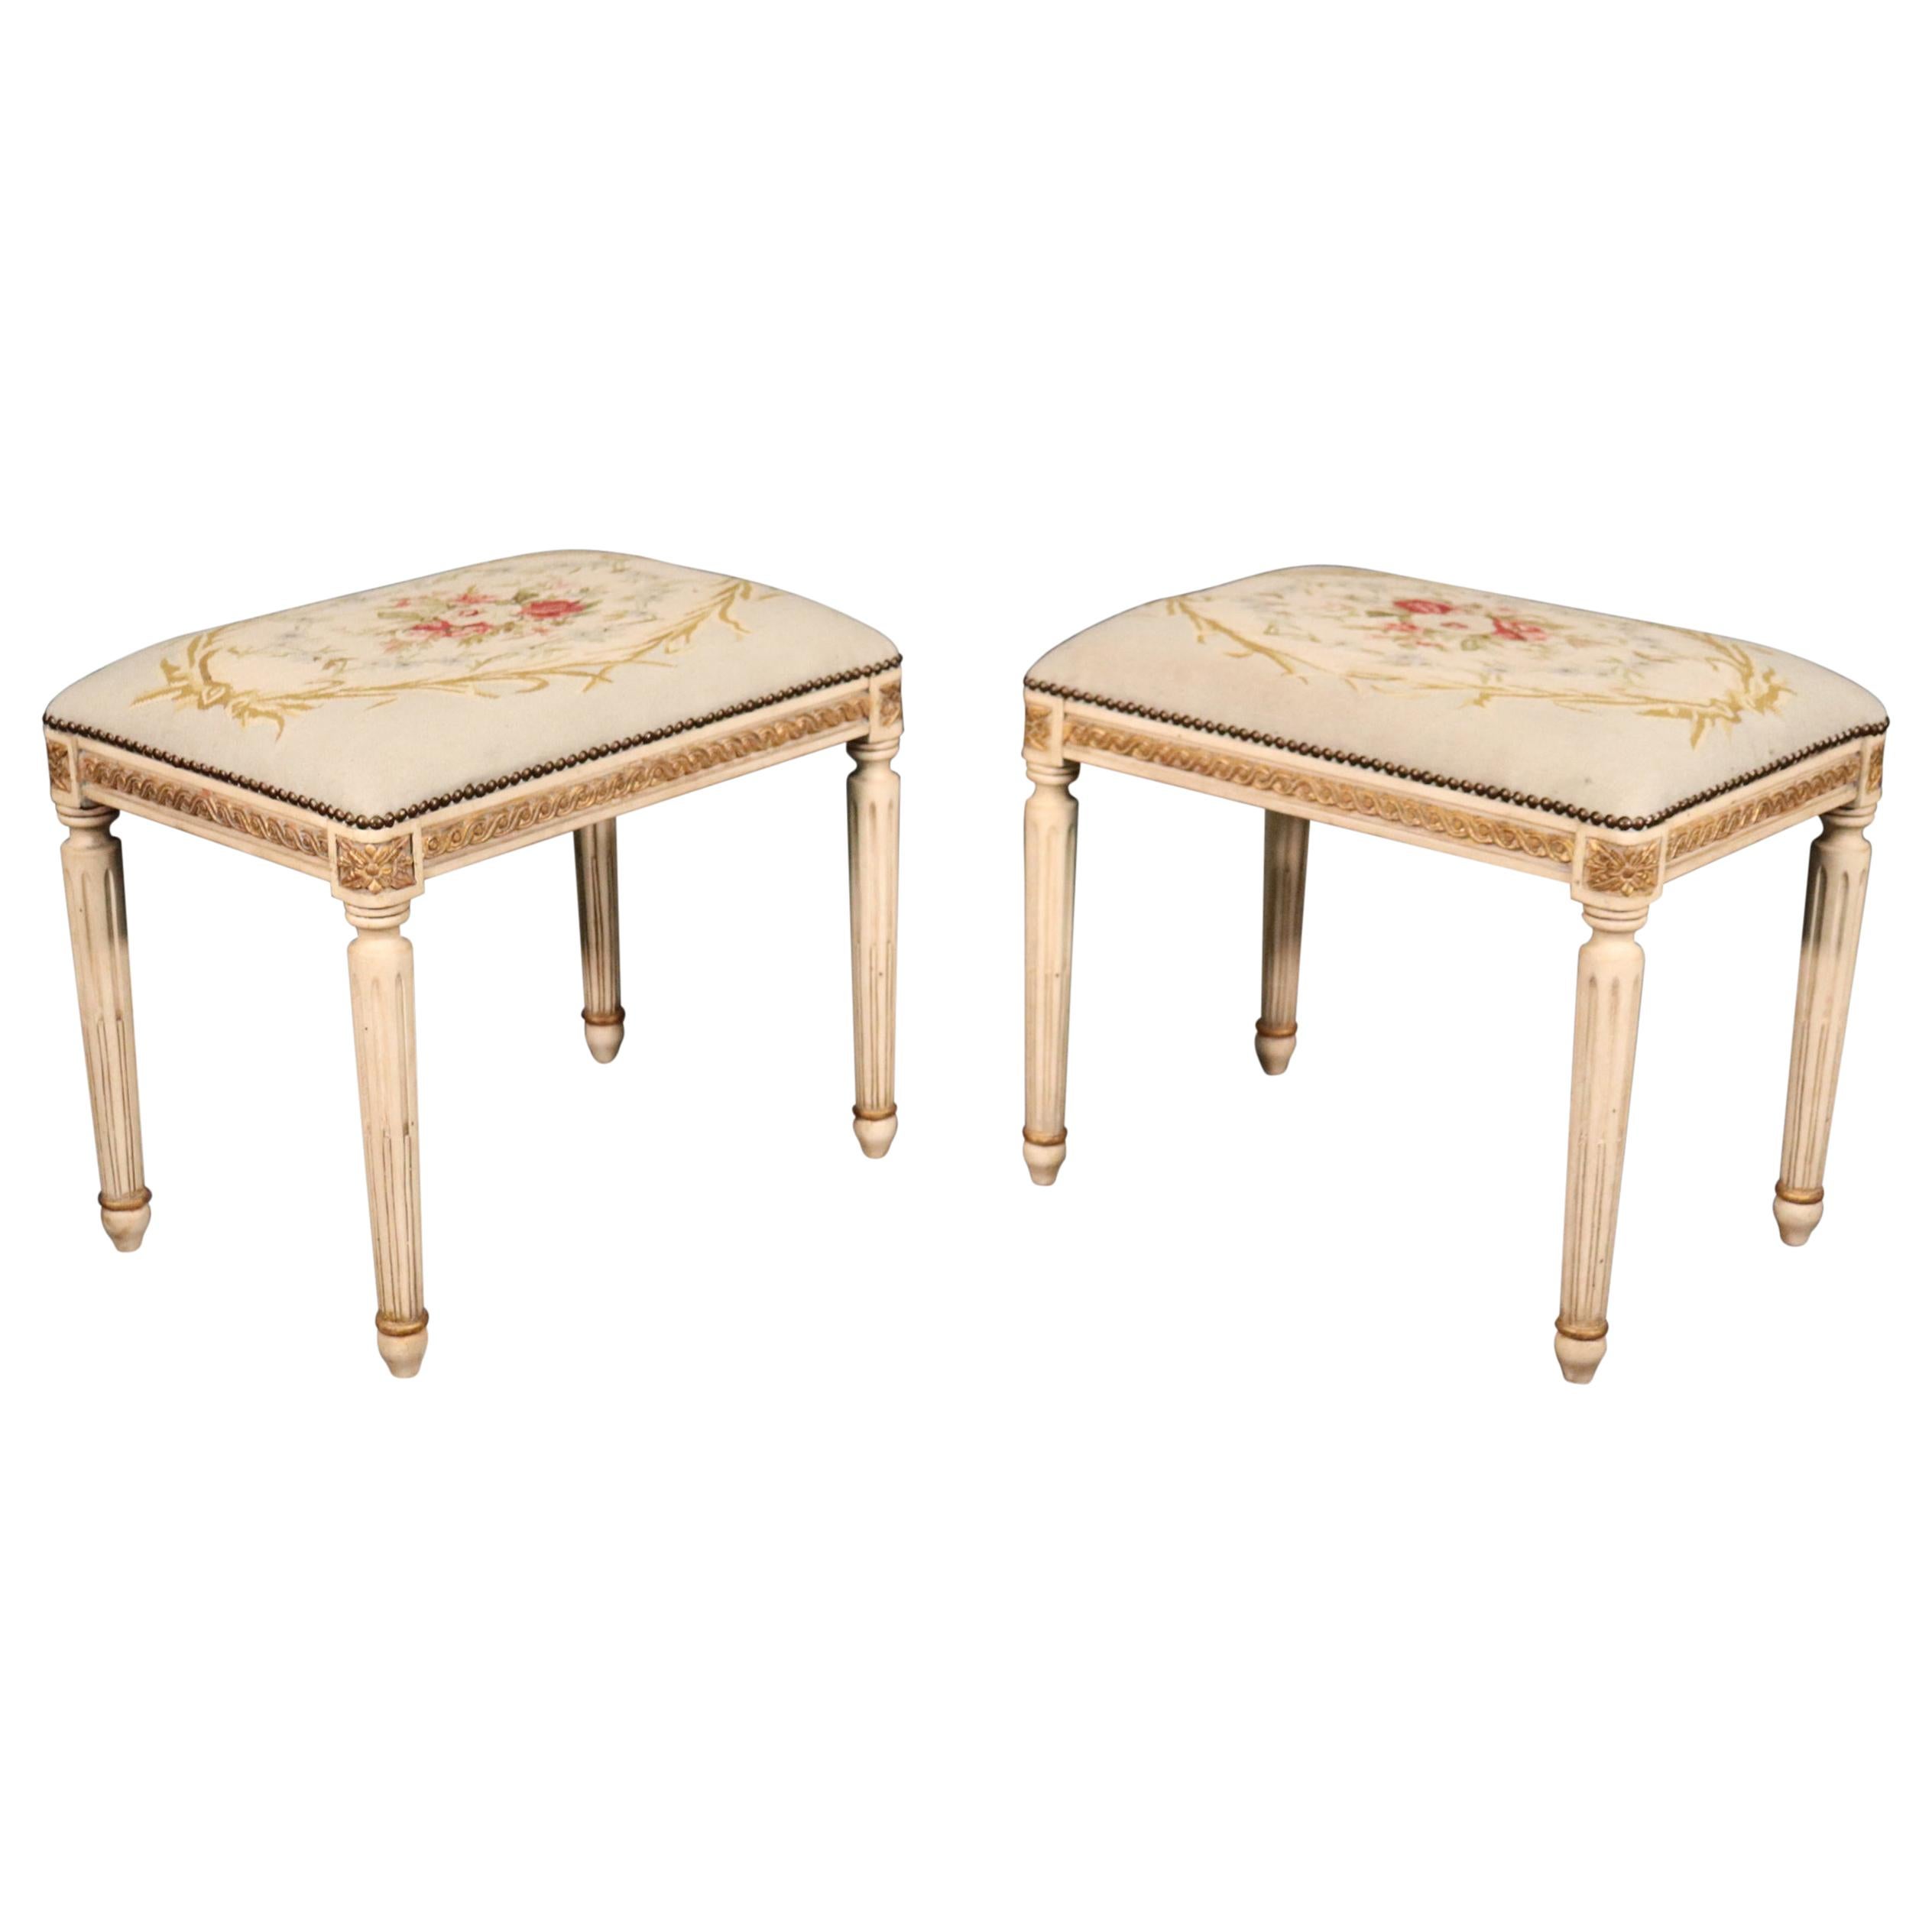 Pair of Gilded Carved French Louis XVI Needlepoint Stools Benches, circa 1950s